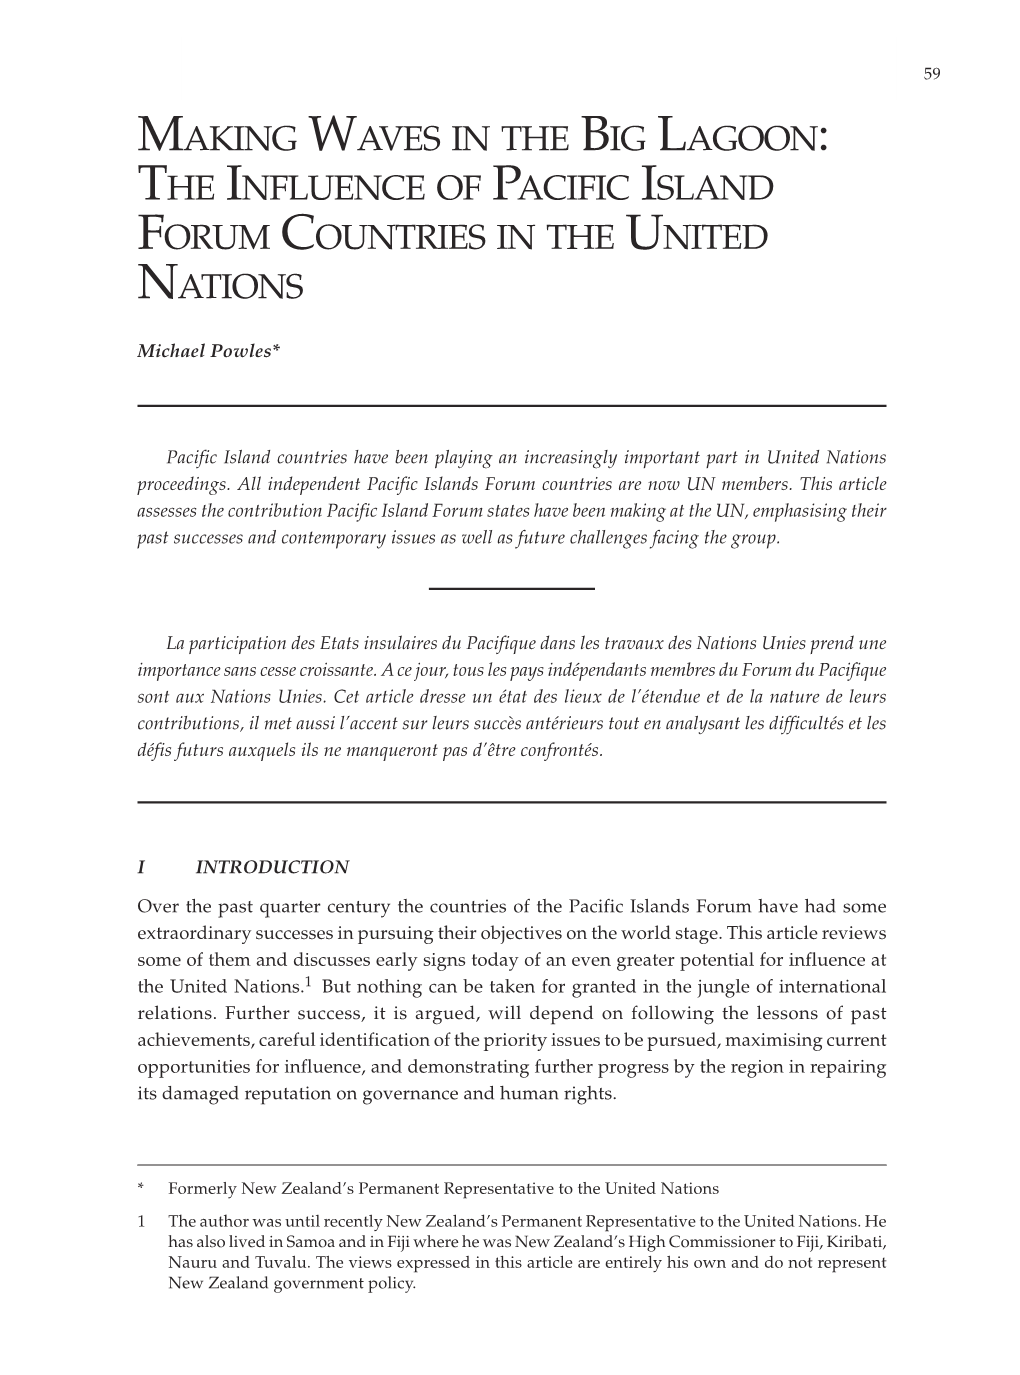 The Influence of Pacific Island Forum Countries in the United Nations